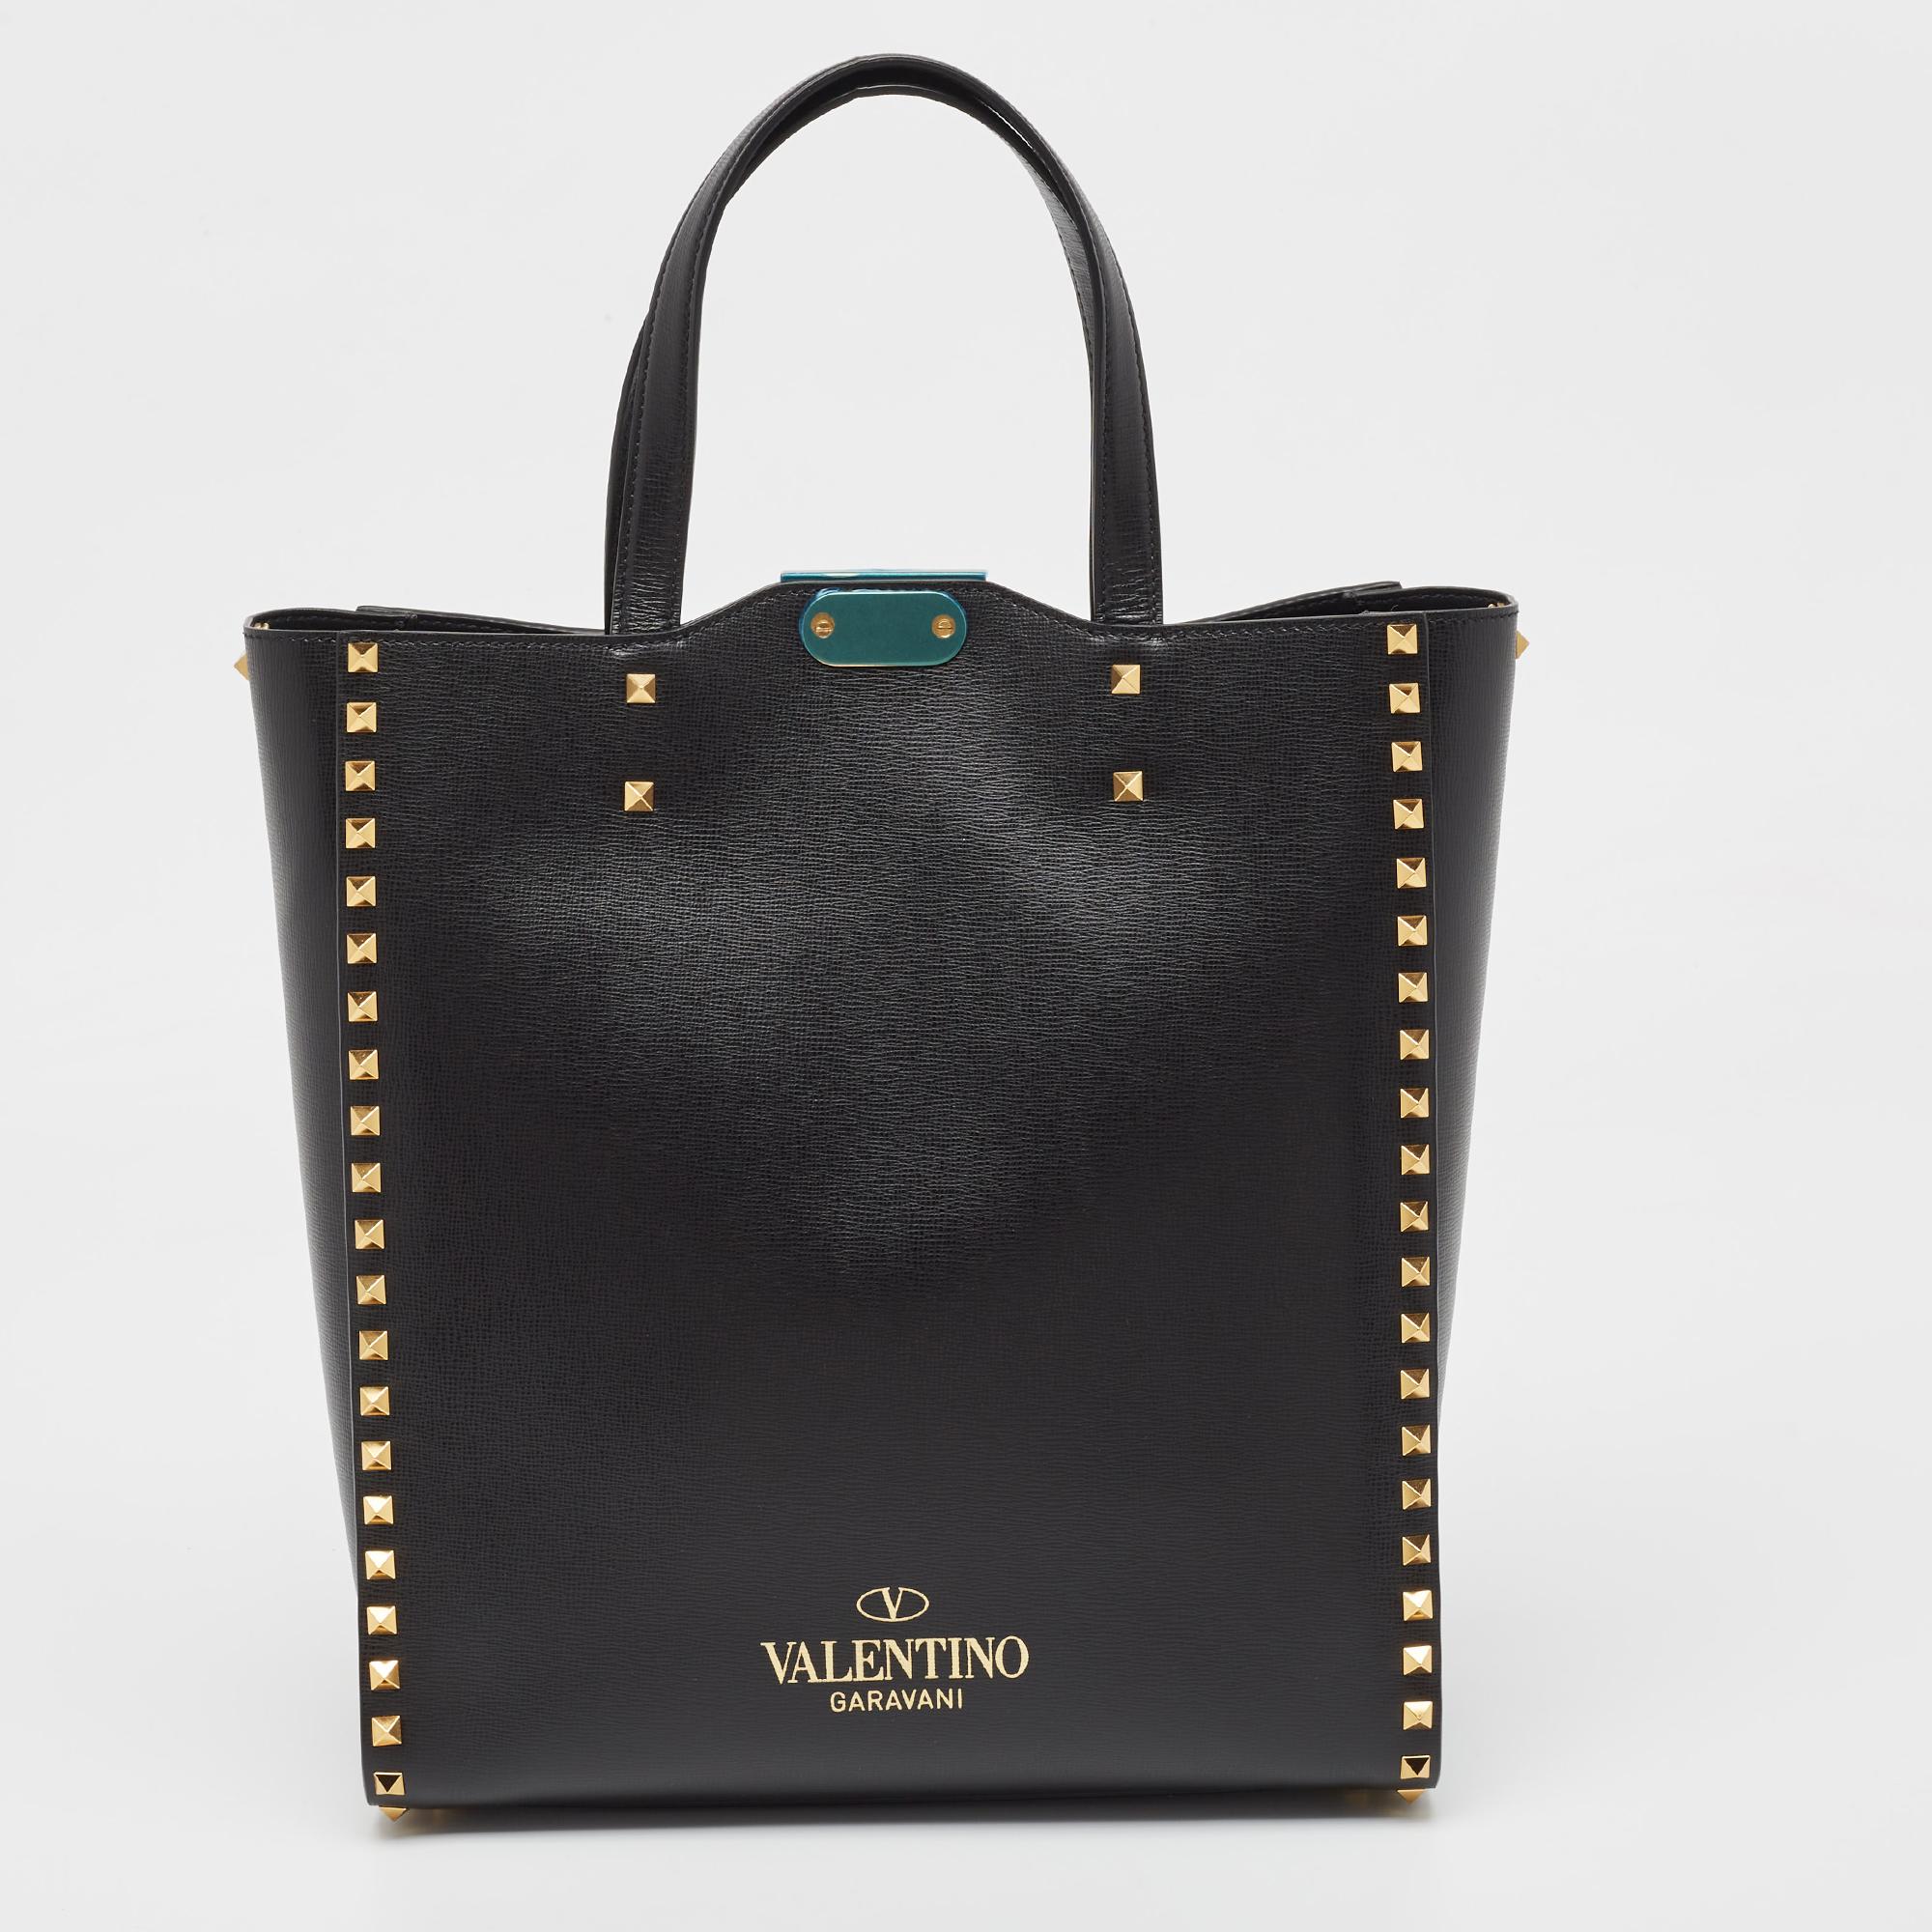 This Alcove tote from Valentino is a perfect blend of function and style. It features a black leather construction enhanced with dual top handles, a detachable strap, and gold-tone Rockstud accents. It is equipped with a spacious interior to easily